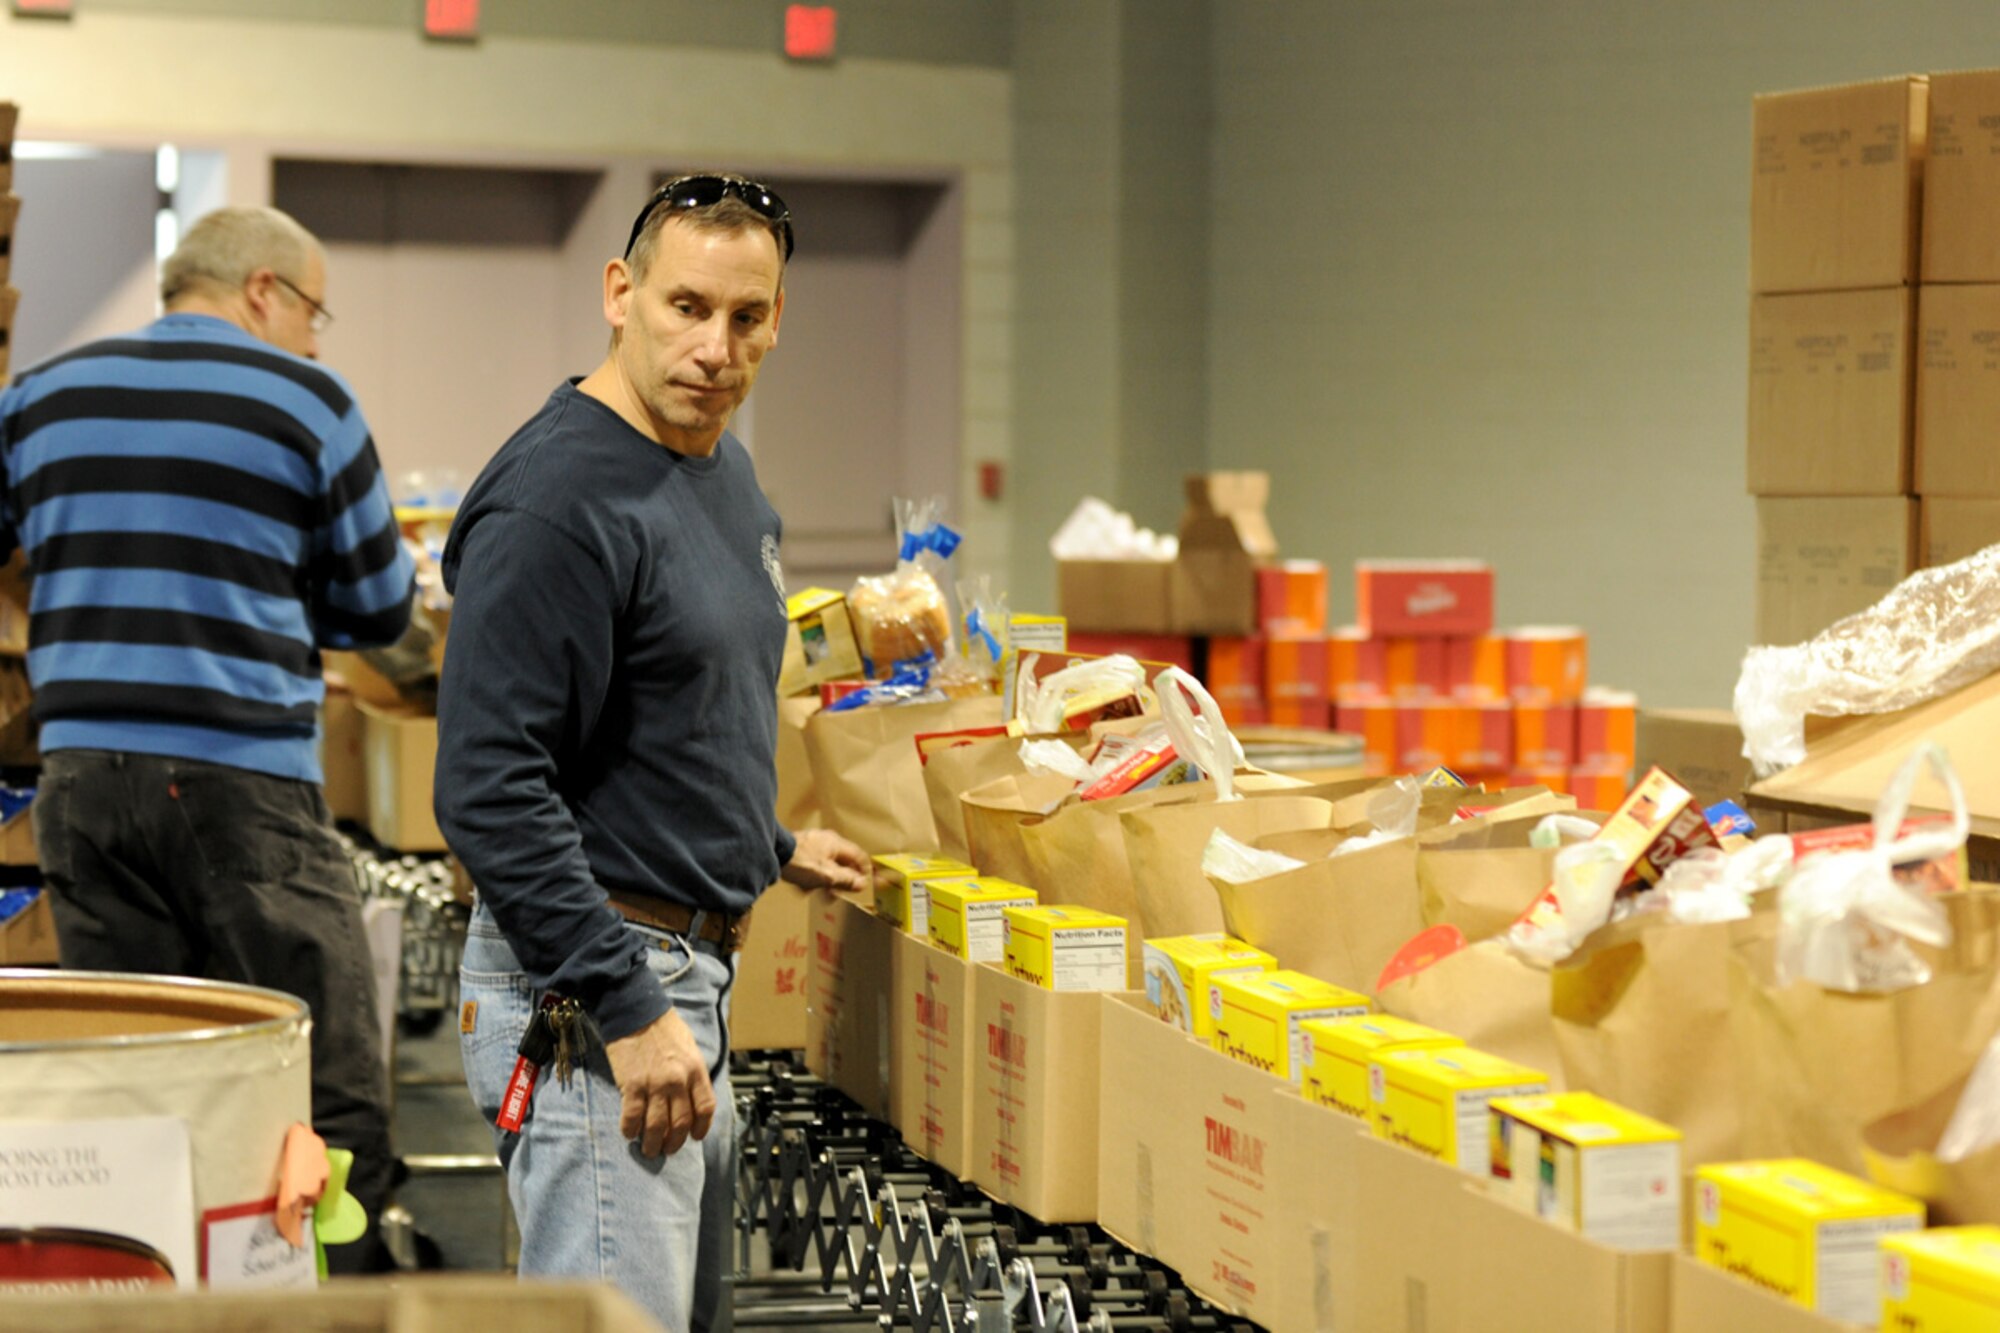 New York State Fire Fighter Mr. Timothy Bak fills boxes at the Oncenter Complex in Syracuse, NY on 22 Dec. 2009. Bak was volunteering at the Annual Christmas Bureau Salvation ArmyFood and Gift drive supplying needy families with gifts for their children and food for their Holiday meal. (US Air Force photo by Tech. Sgt. Jeremy M. Call/Released)